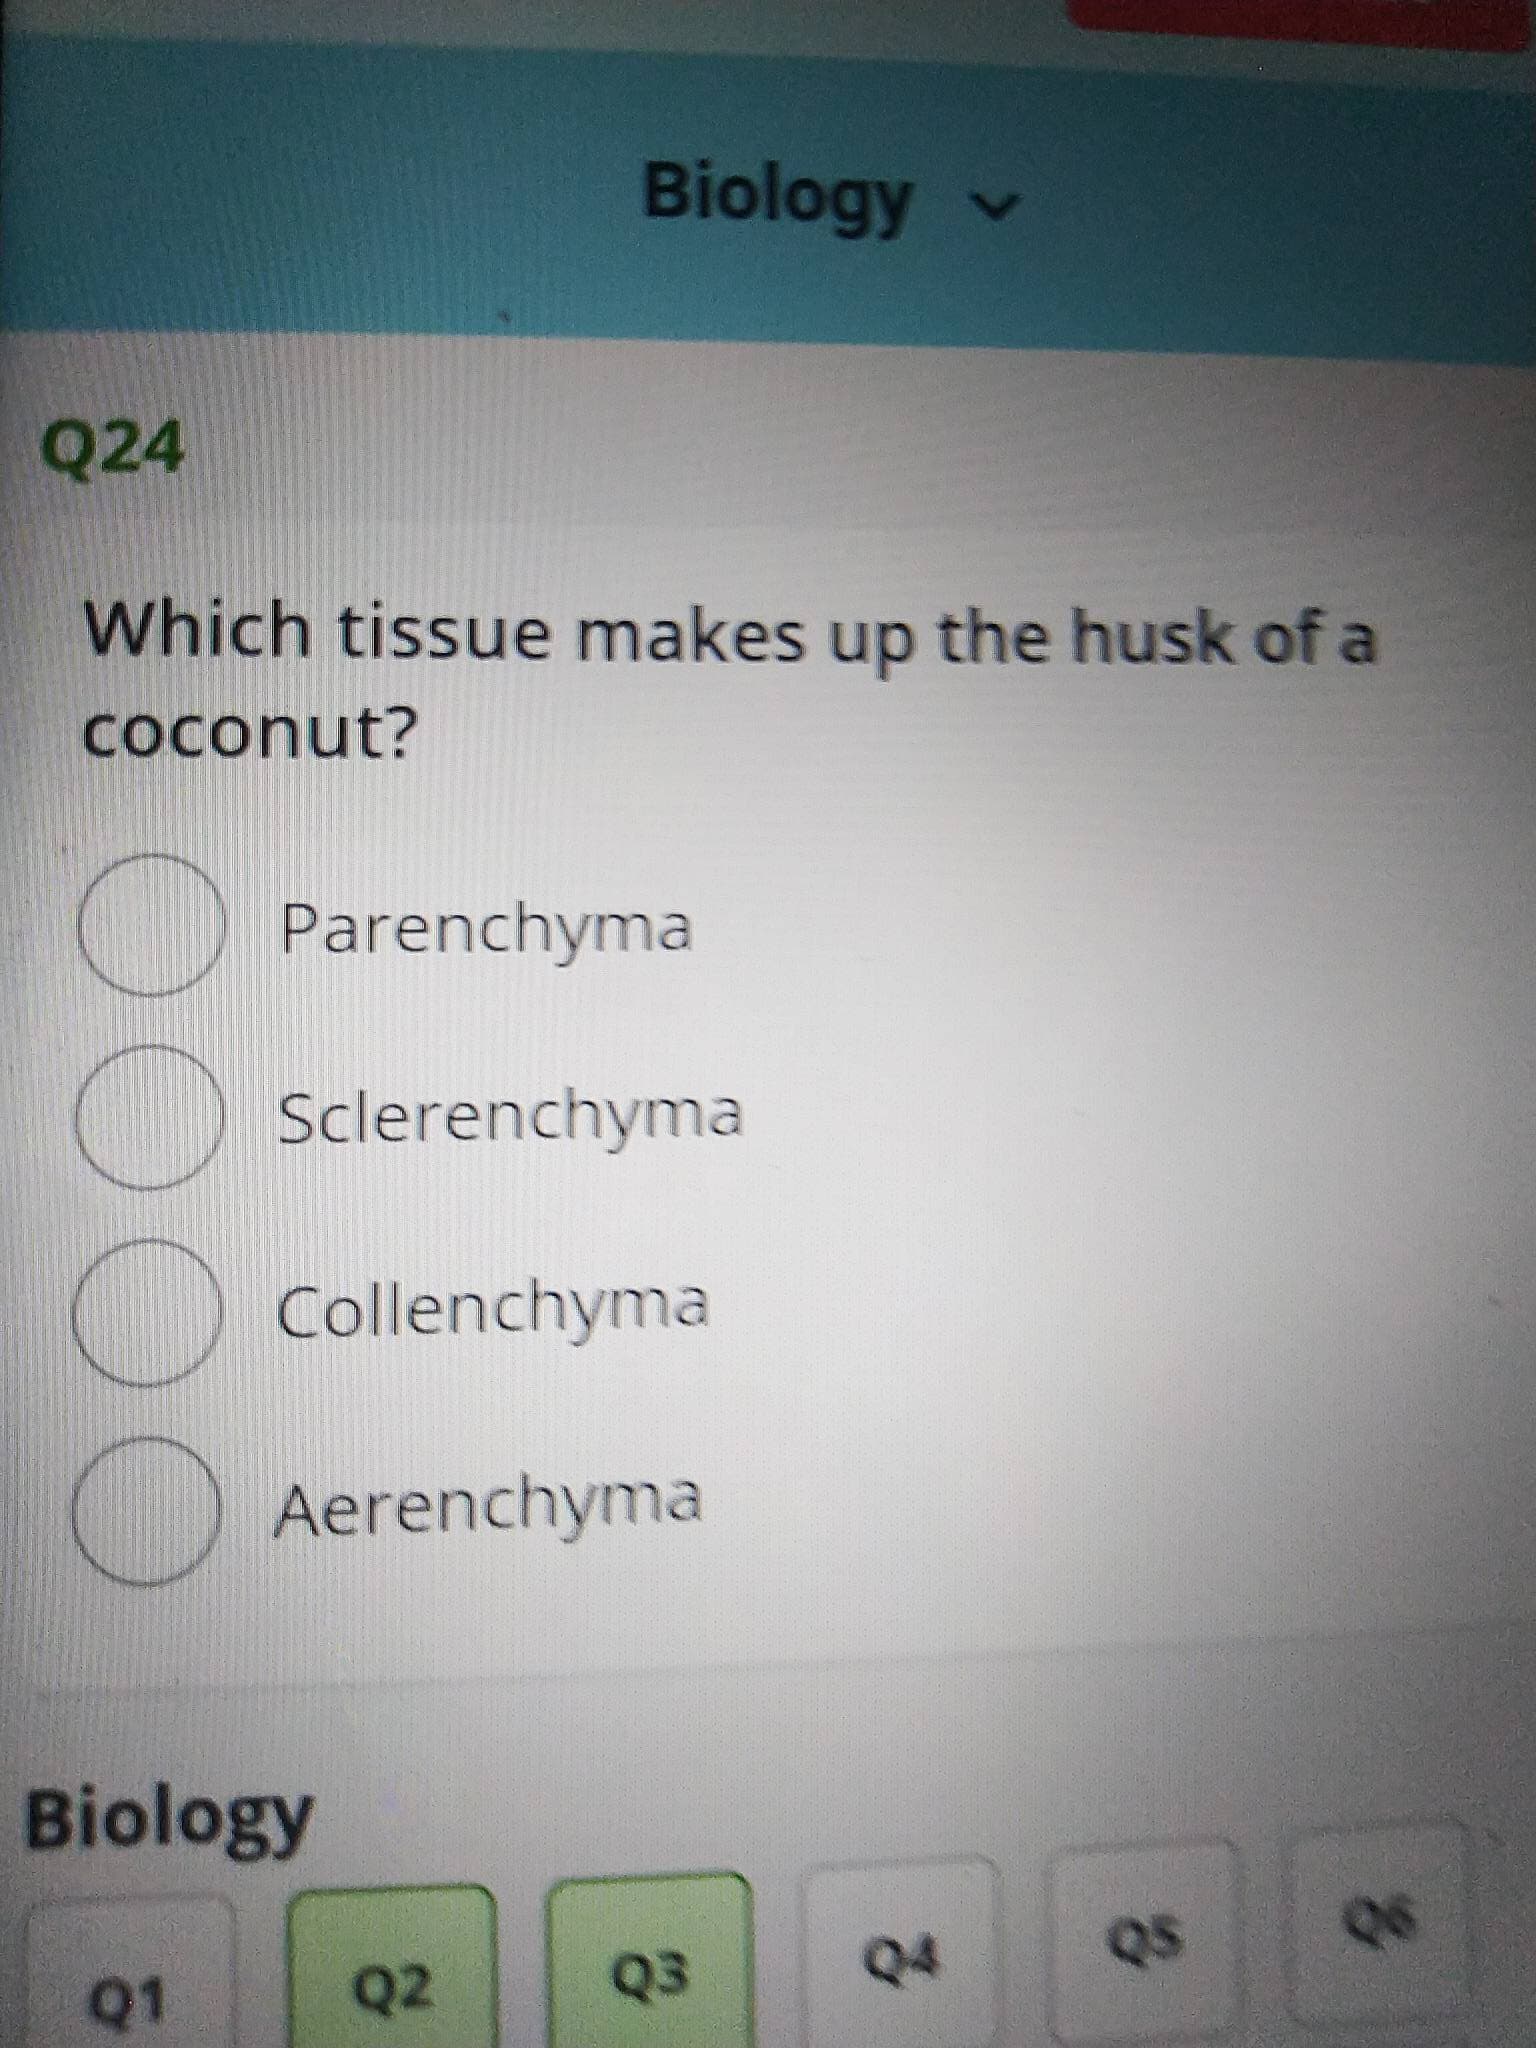 Biology v
Q24
Which tissue makes up the husk of a
coconut?
Parenchyma
Sclerenchyma
Collenchyma
Aerenchyma
Biology
Q1
Q2
Q3
